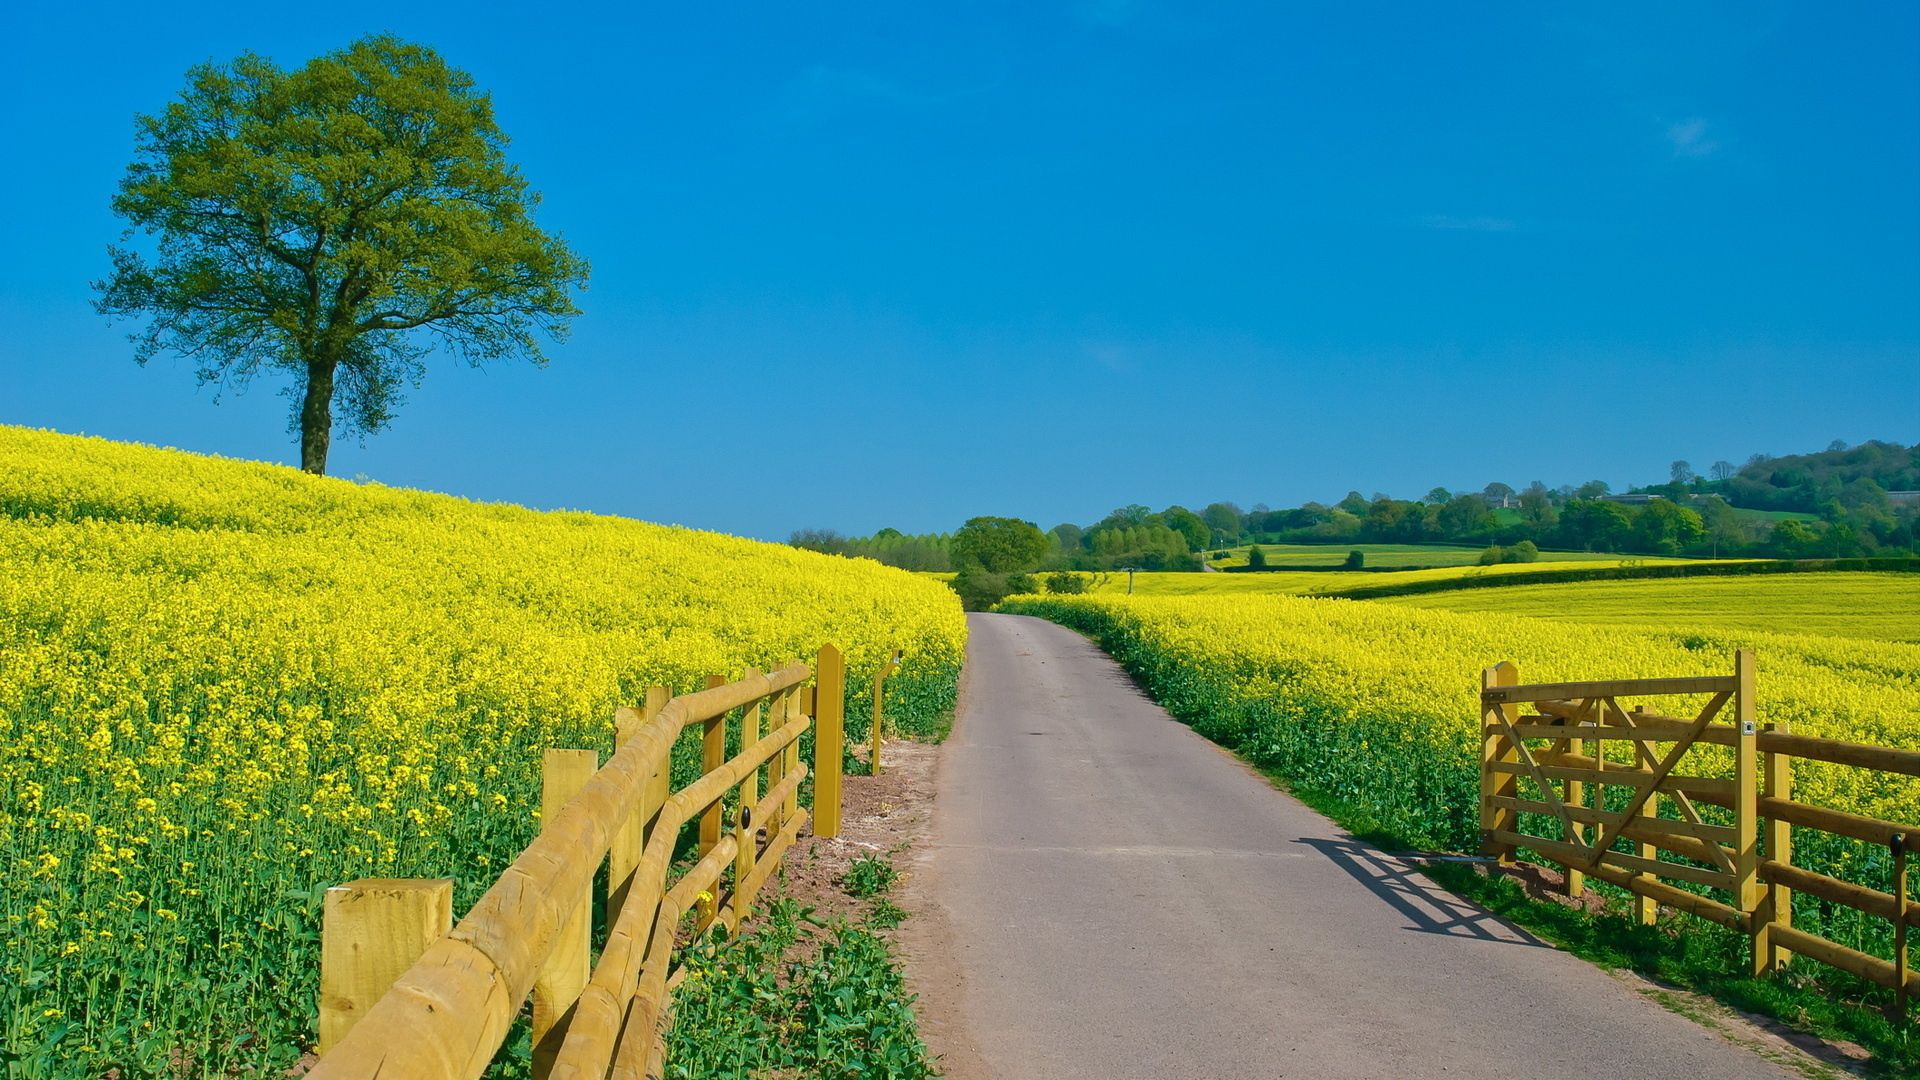 open spaces, road, summer, expanse, flowers, slopes, yellow, nature, fencing, enclosure, day phone wallpaper